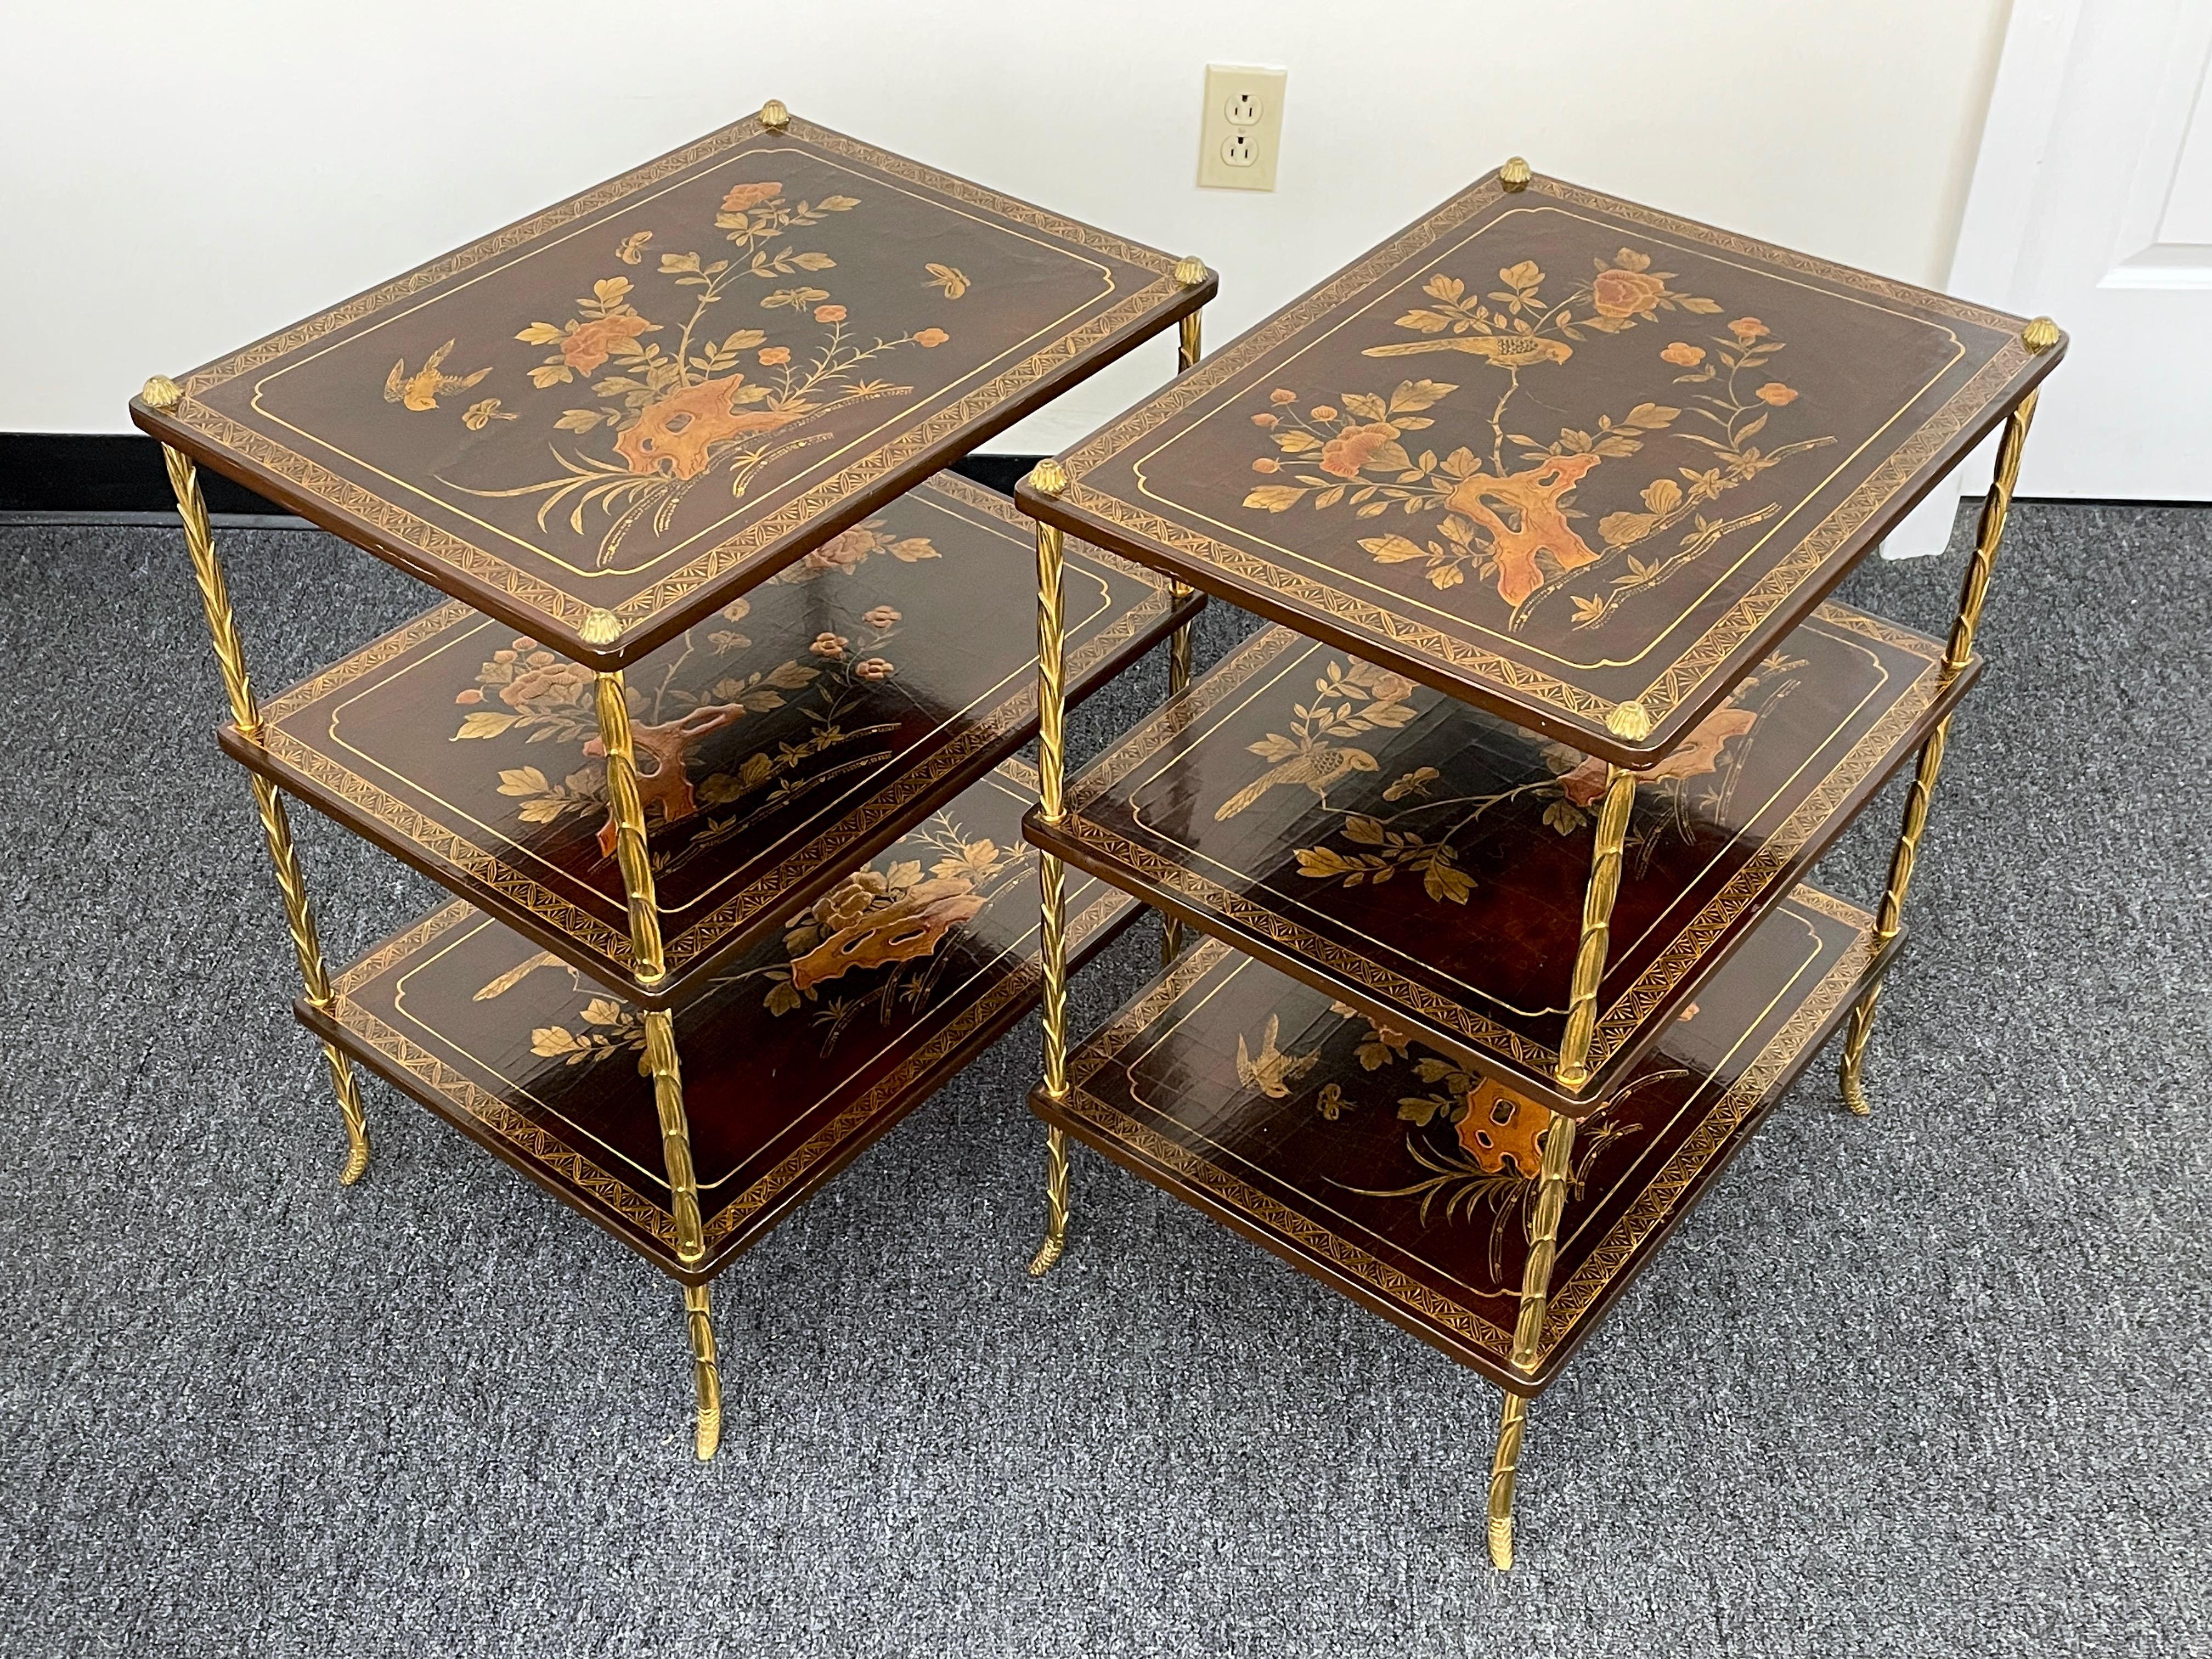 A rare pair of stunning French gilt-bronze and Chinoiserie top side tables with three tiers (attributed to Maison Baguès, mid-Century). Each table has three rectangular burgundy-lacquered tops decorated in the Chinoiserie style with each top having